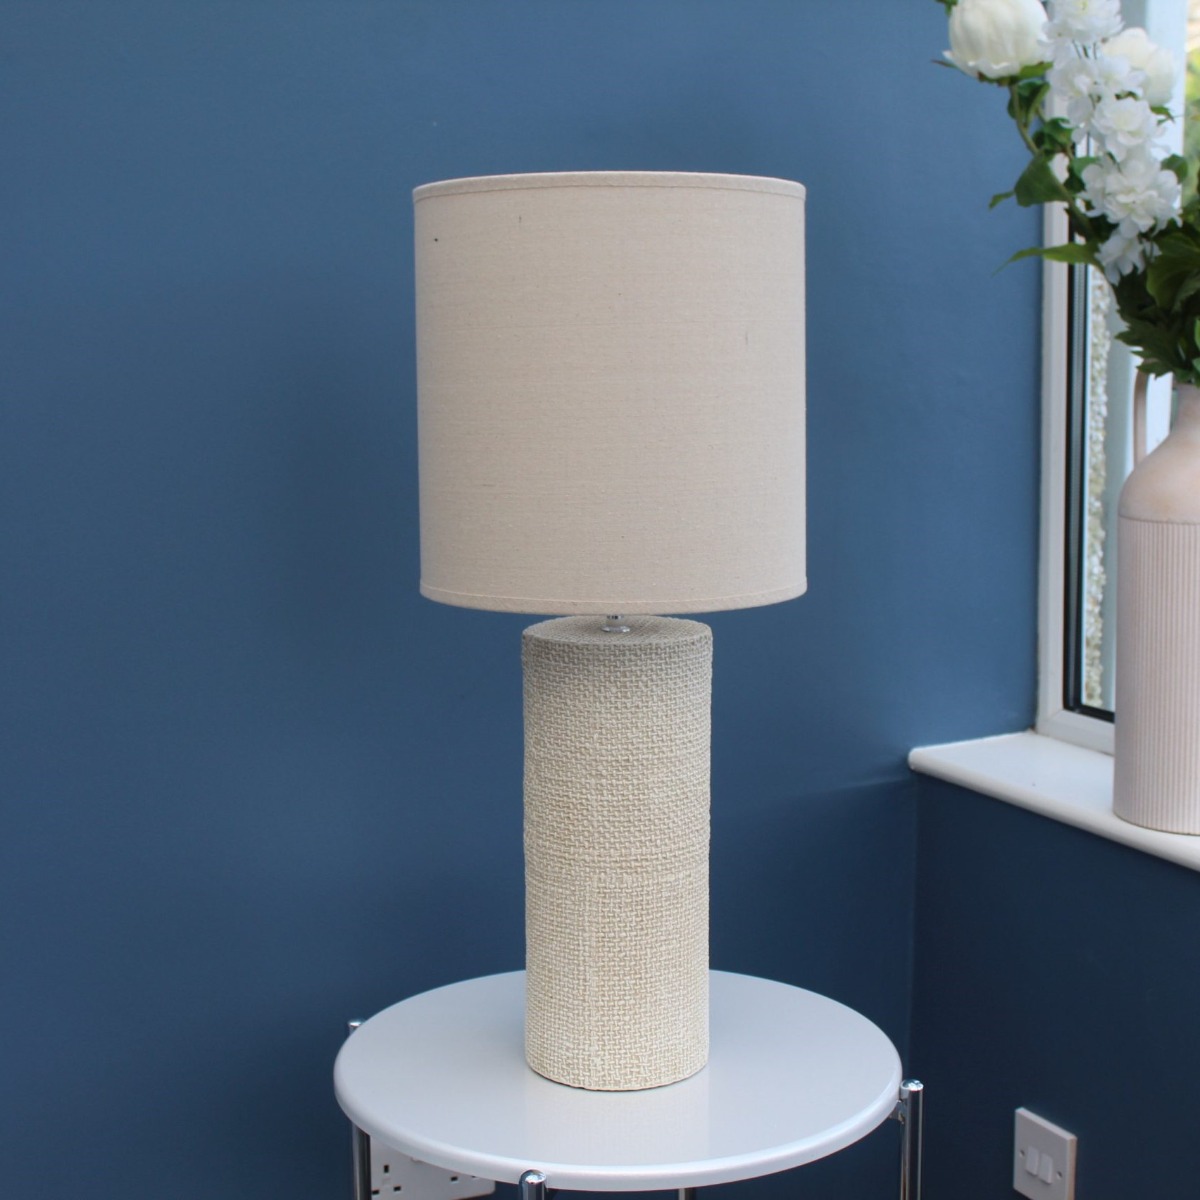 Woven Pattern Column Ceramic Table Lamp with Linen Shade